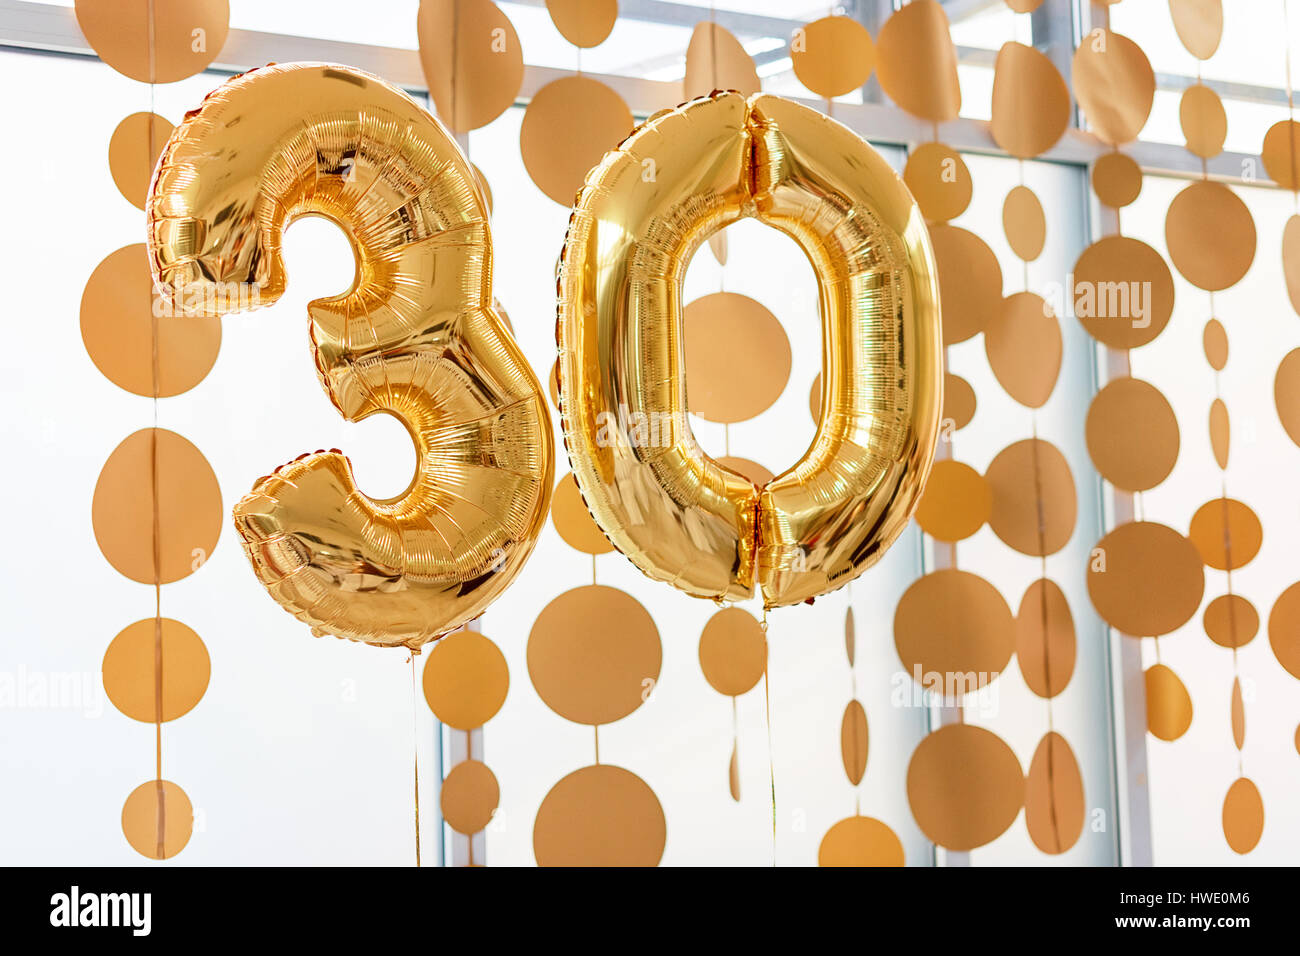 Golden balloons with ribbons - Number 30. Party decoration, anniversary sign for happy holiday, celebration, birthday, carnival, new year. Metallic design balloon. Stock Photo